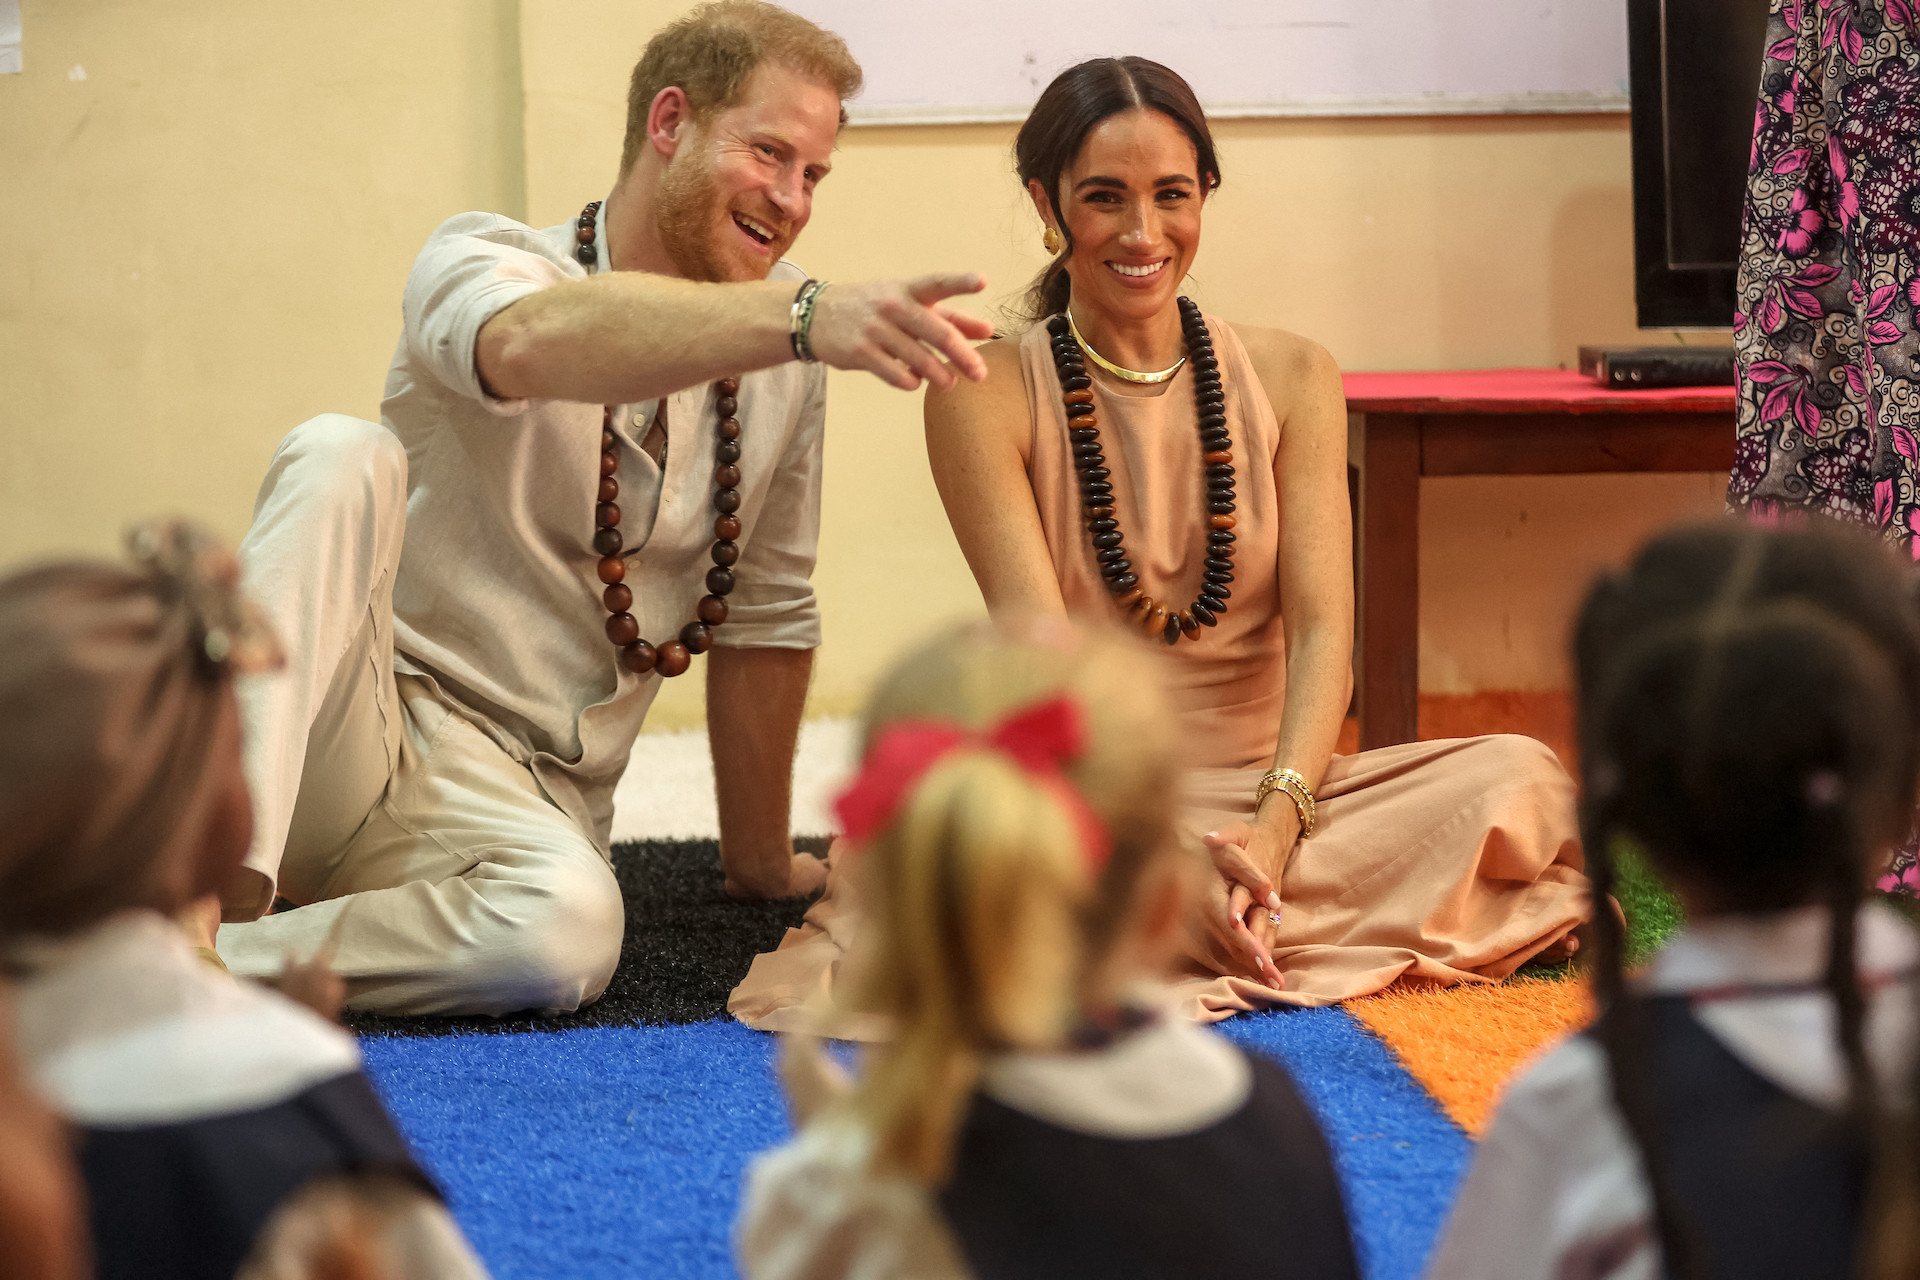 Britain's Prince Harry and Meghan Markle meet with children during their visit at the Lightway Academy in Abuja. GETTY IMAGES